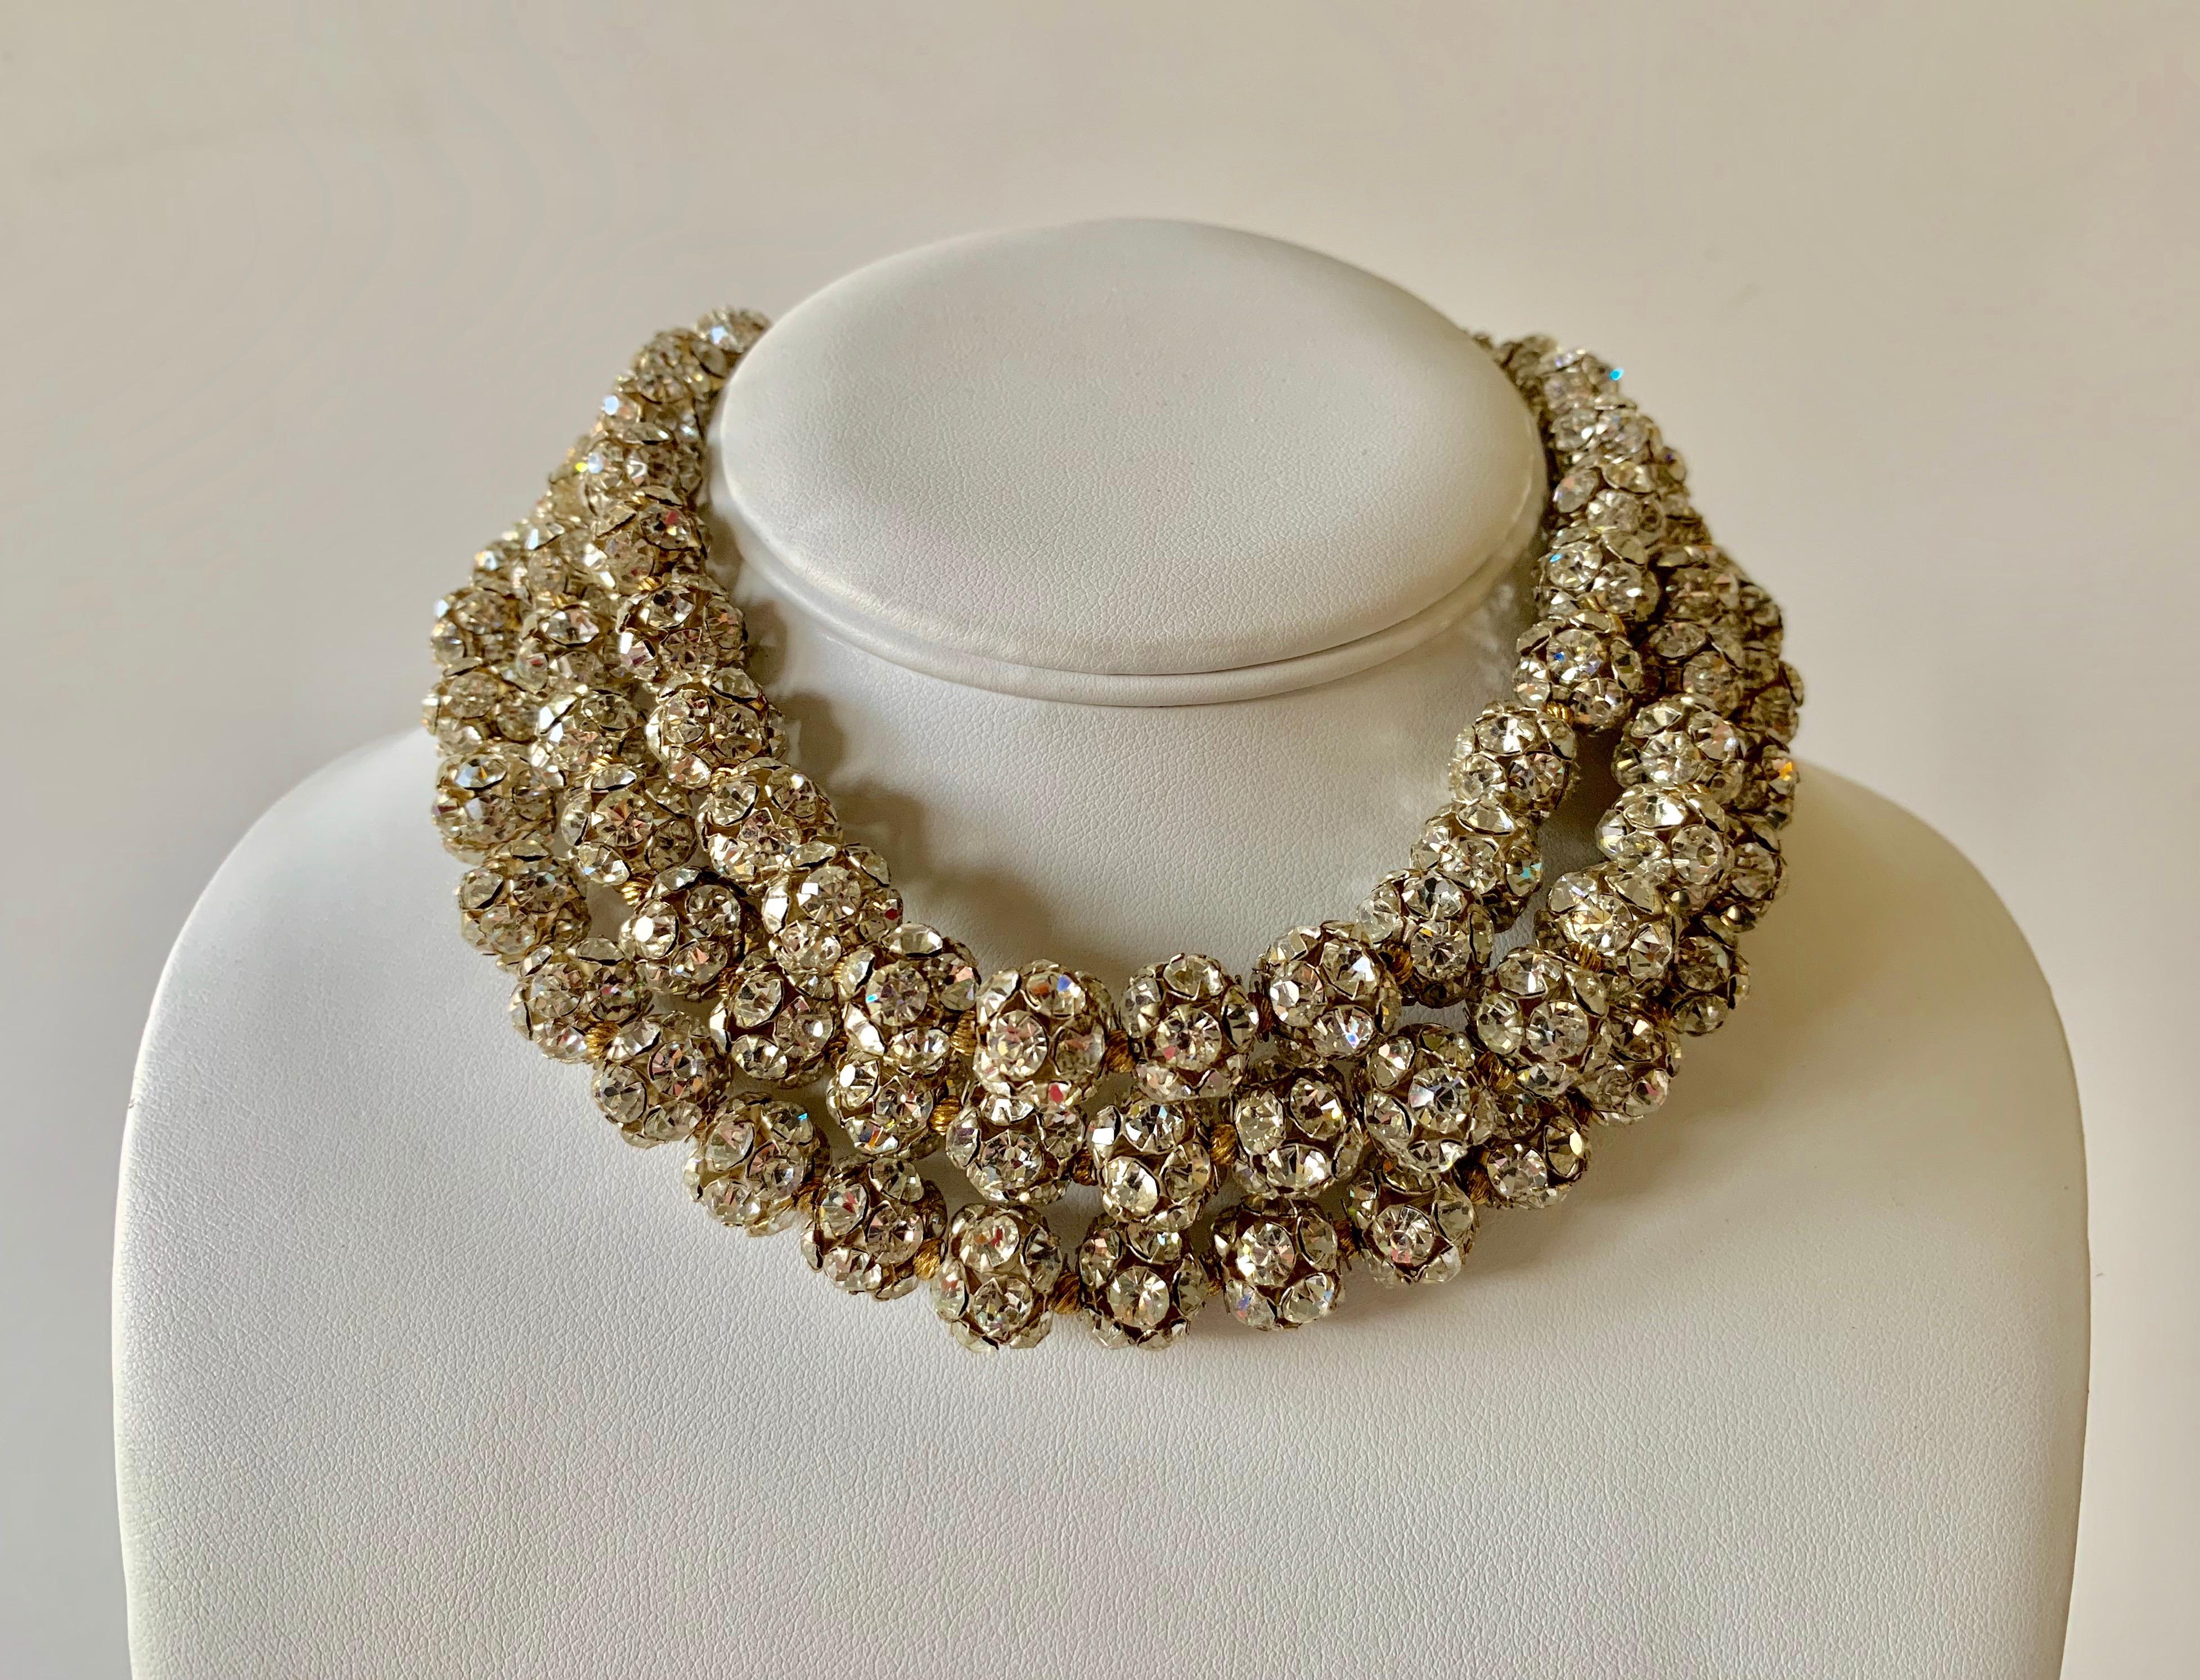 Unusual dramatic vintage triple strand rondelle diamante statement necklace. The necklace features a simple yet bold design, comprised out of silver-tone and gold-tone metal with round rondelle beads which are covered by clear rhinestones in three